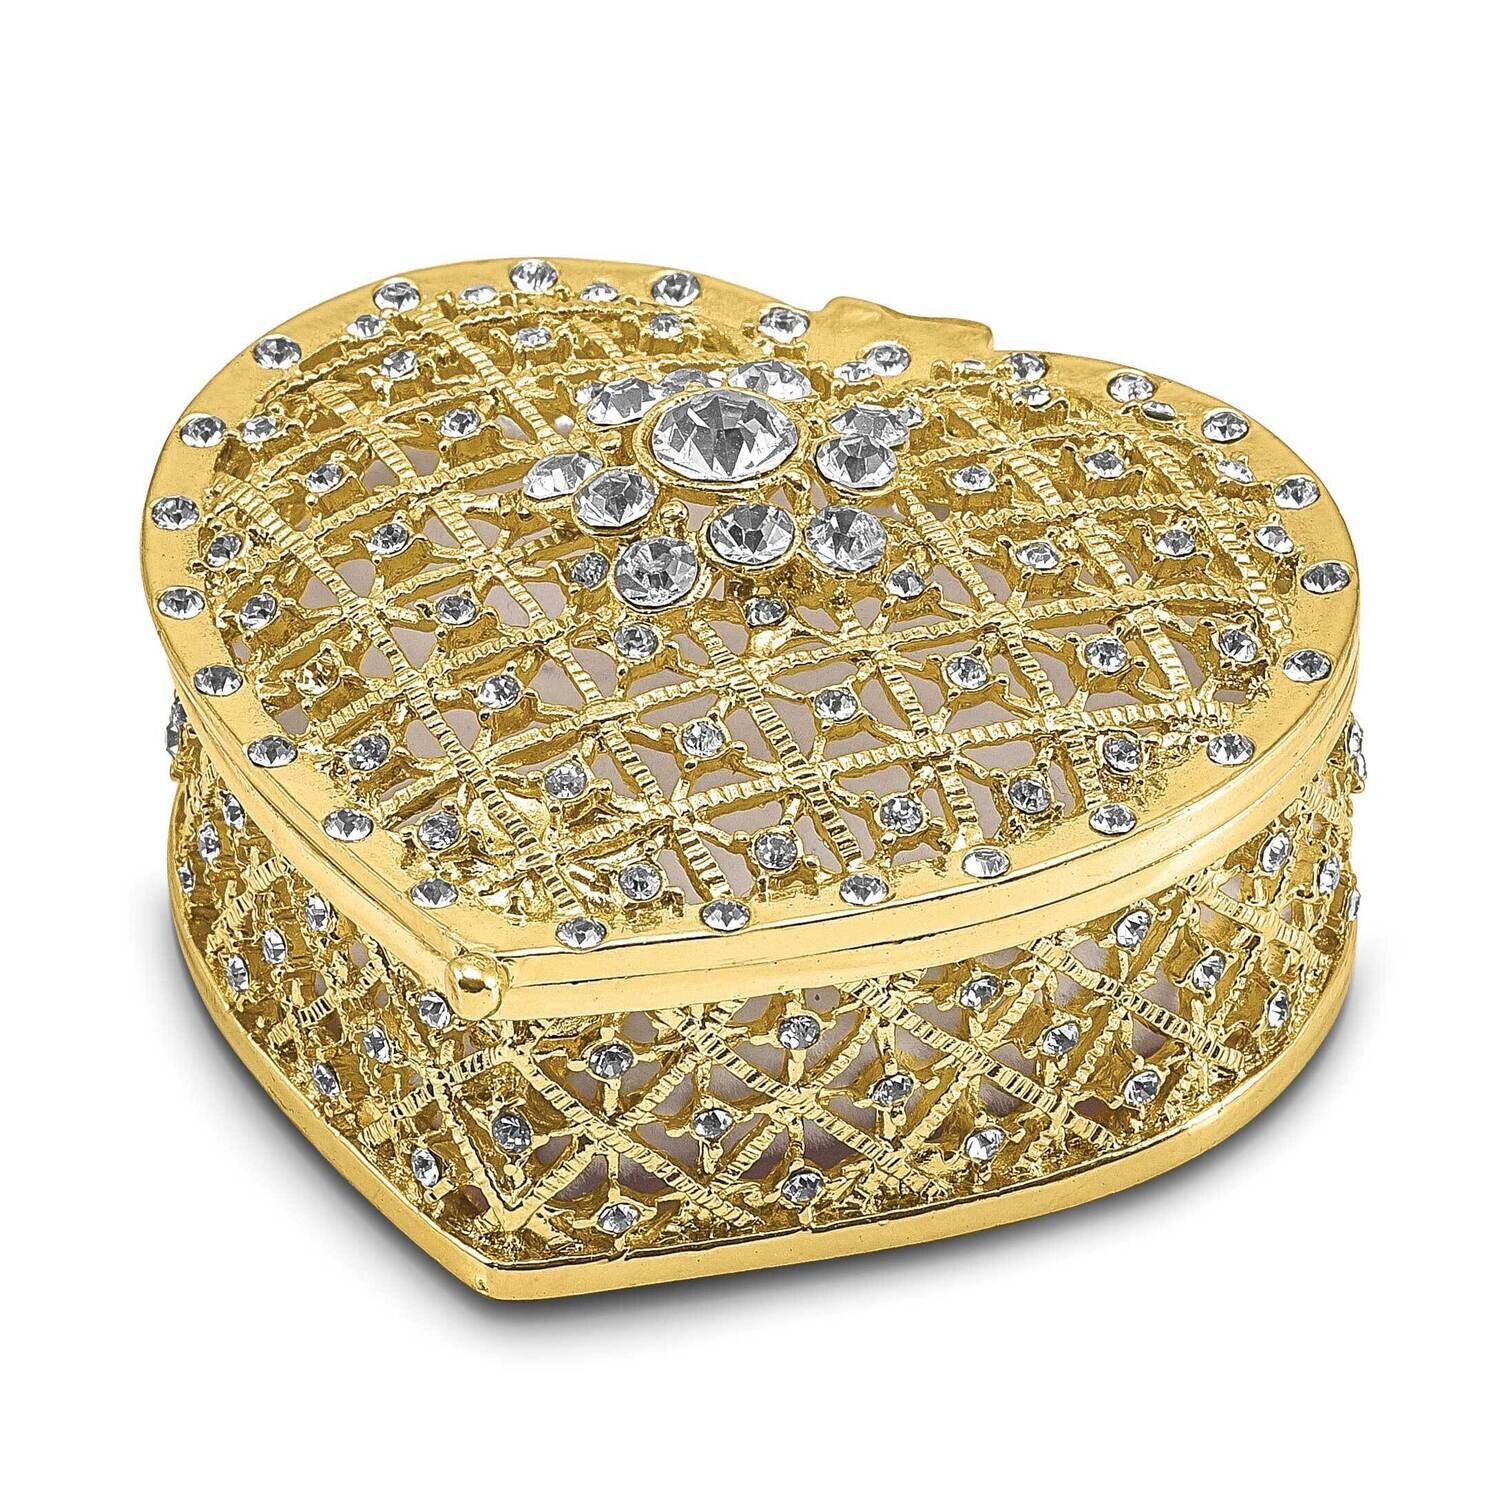 By Jere ROMANCE Filigree Heart with Ring Pad Trinket Box with Matching 18 Inch Necklace Pewter Bejeweled Crystals Gold-tone Enameled BJ4132